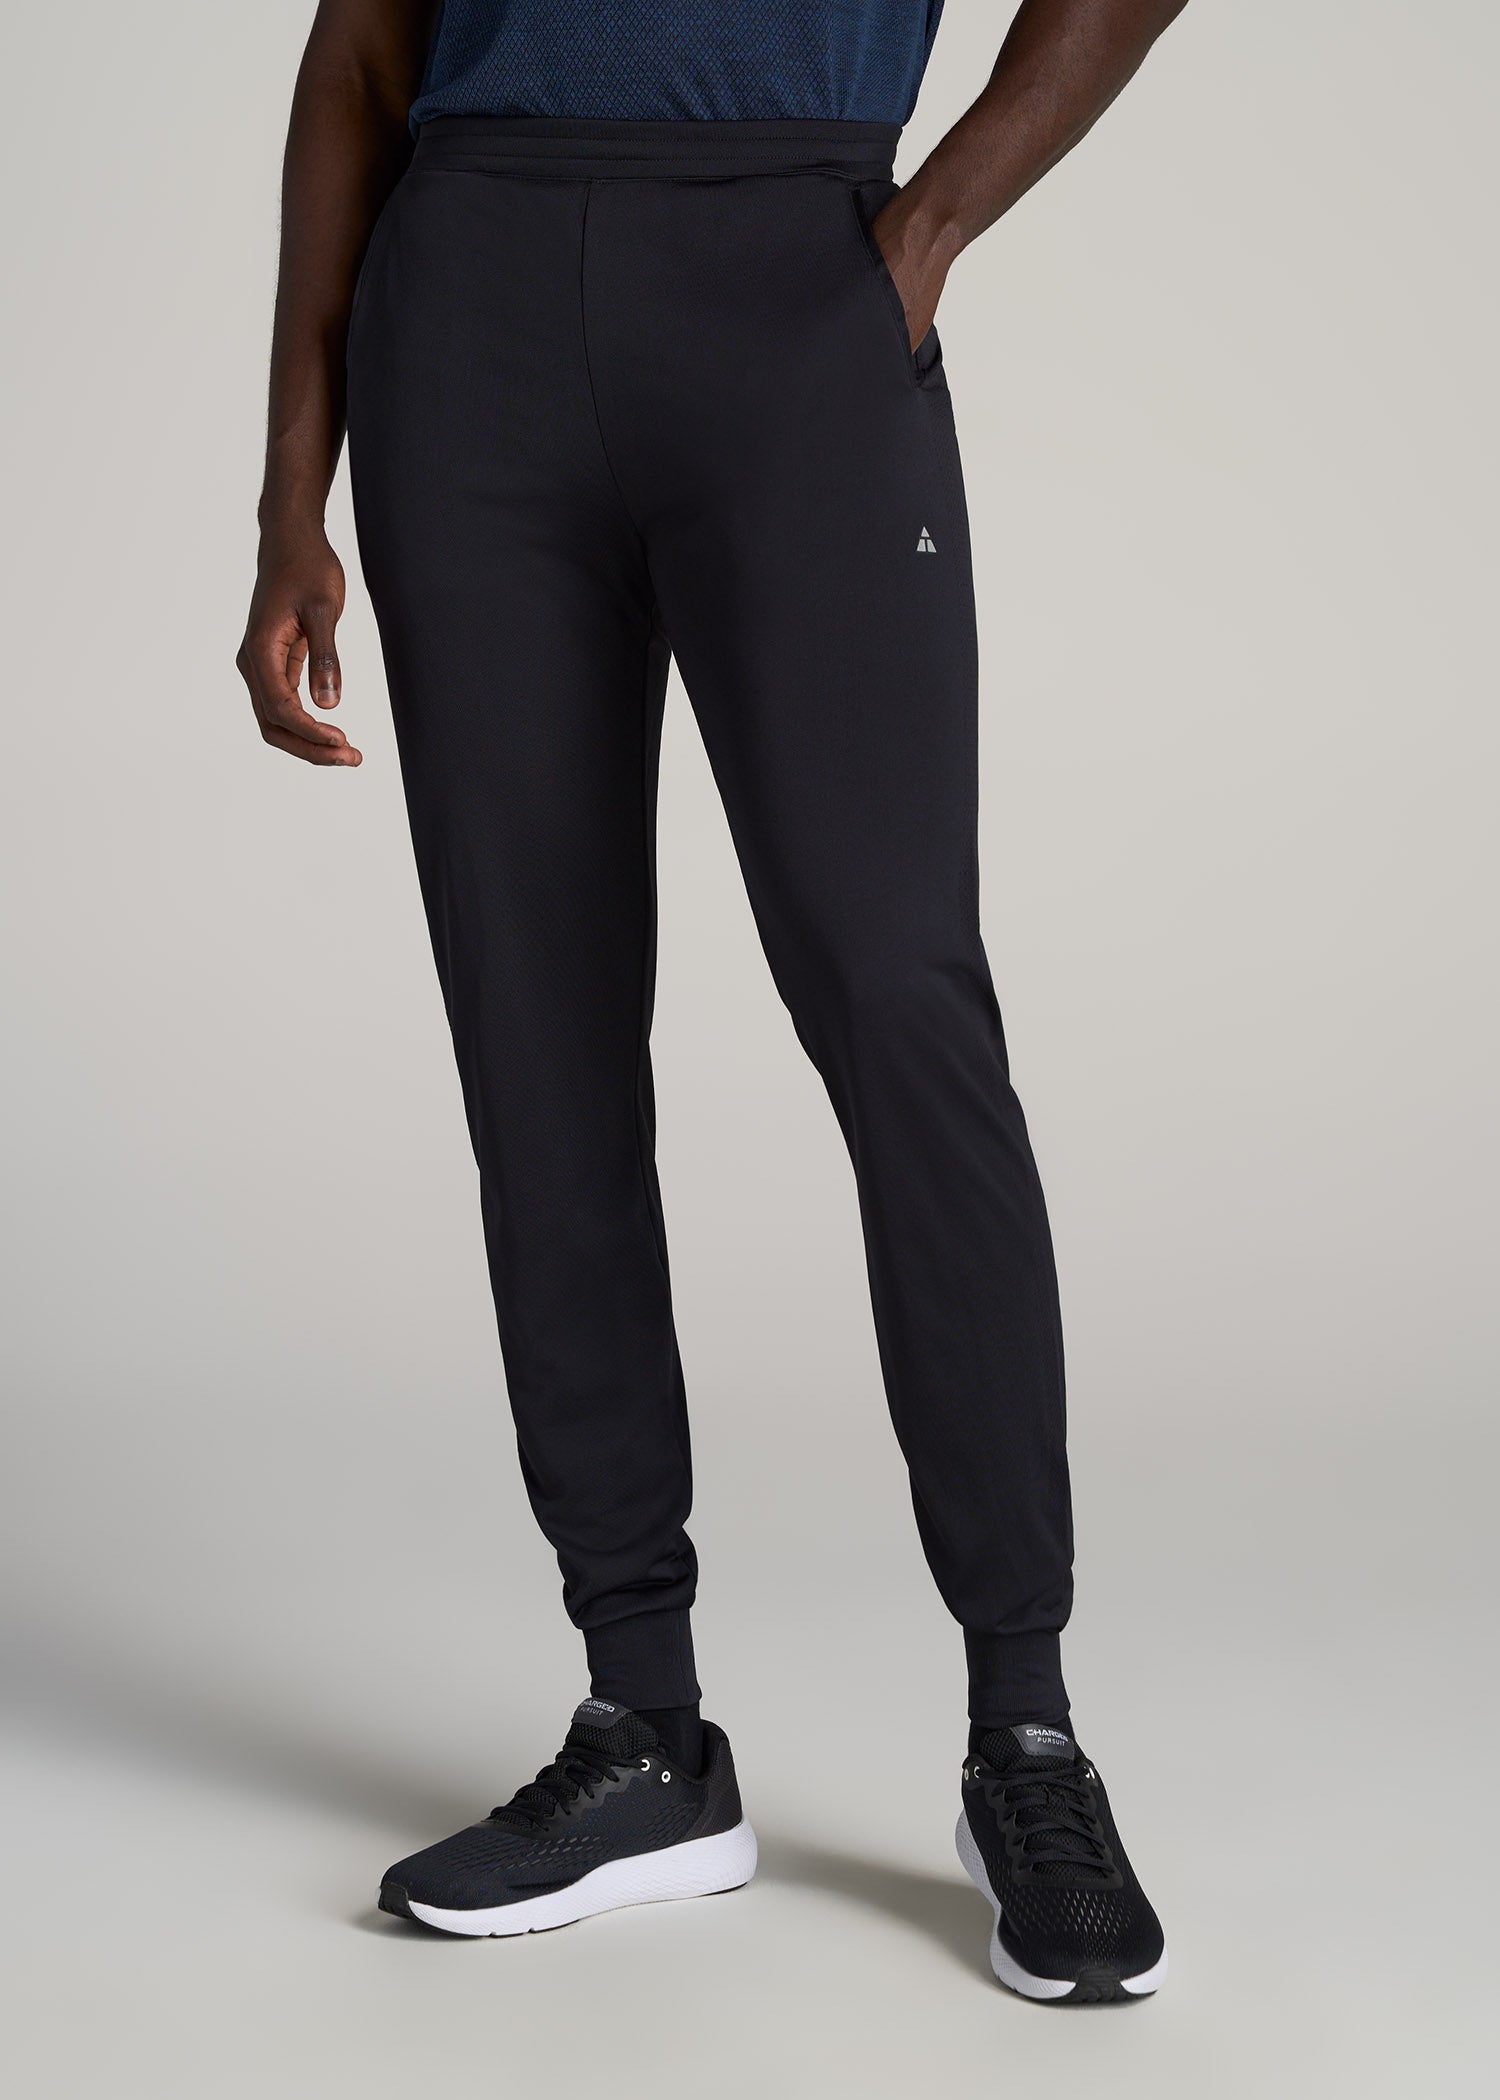 Weekender Stretch Lounge Joggers for Tall Men in Charcoal Mix